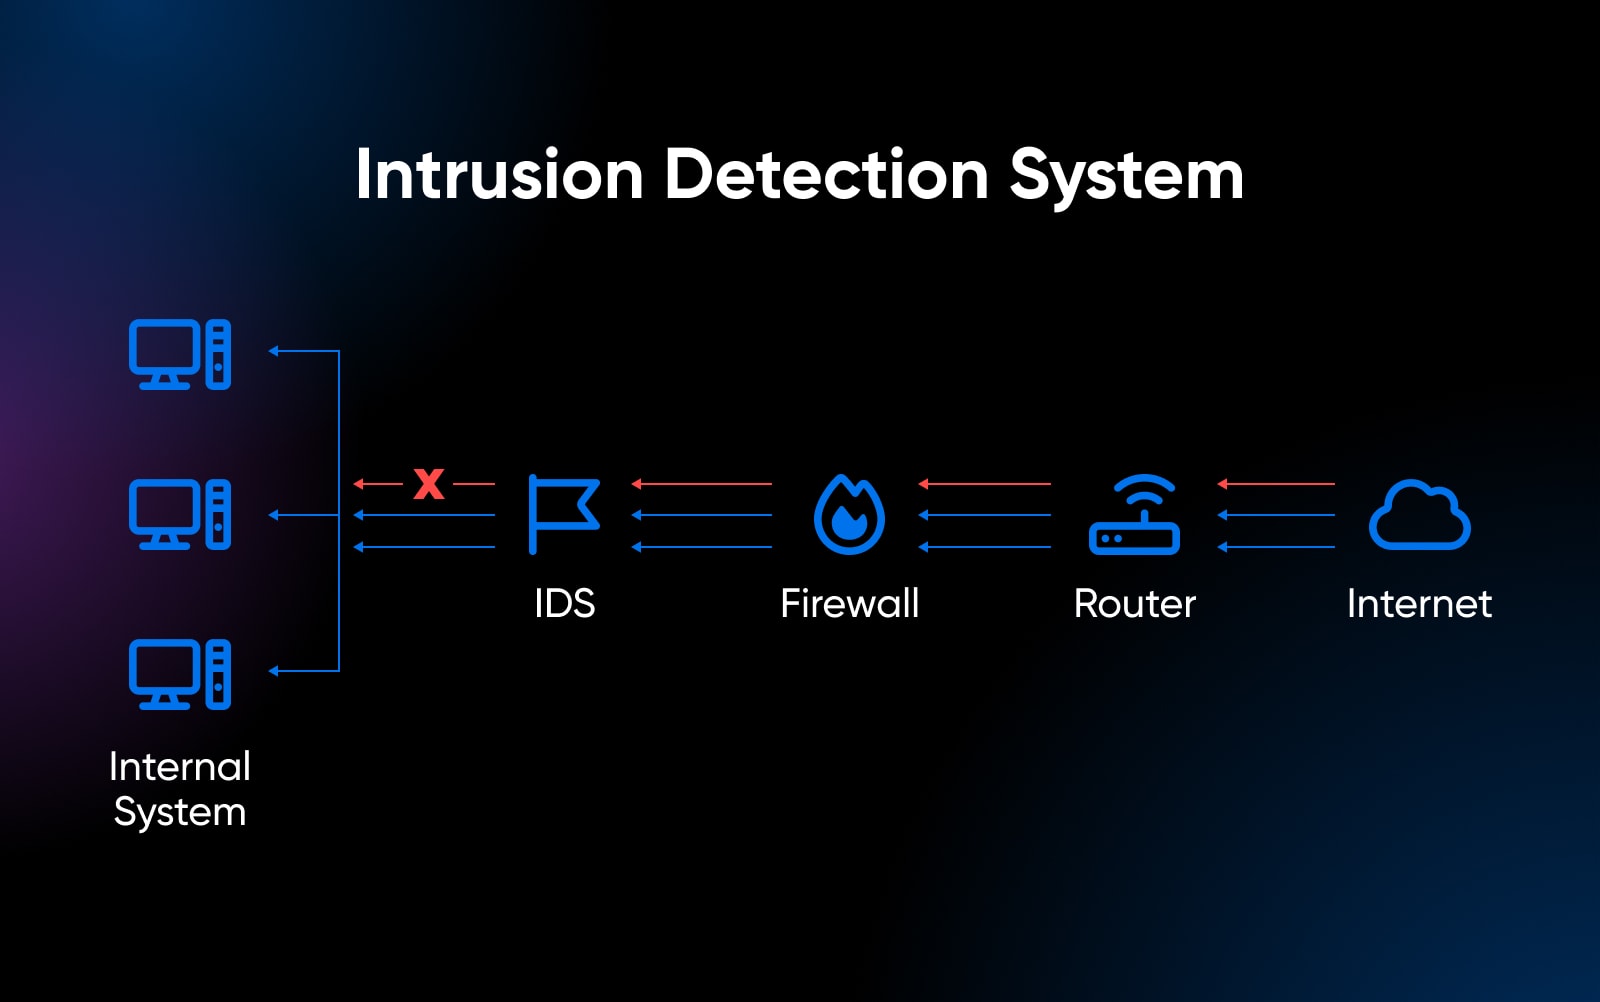 visual representation of a intrusion detection system represented by various network lines from internet to router to firewall to IDS to system that are blocked at a certain checkpoint